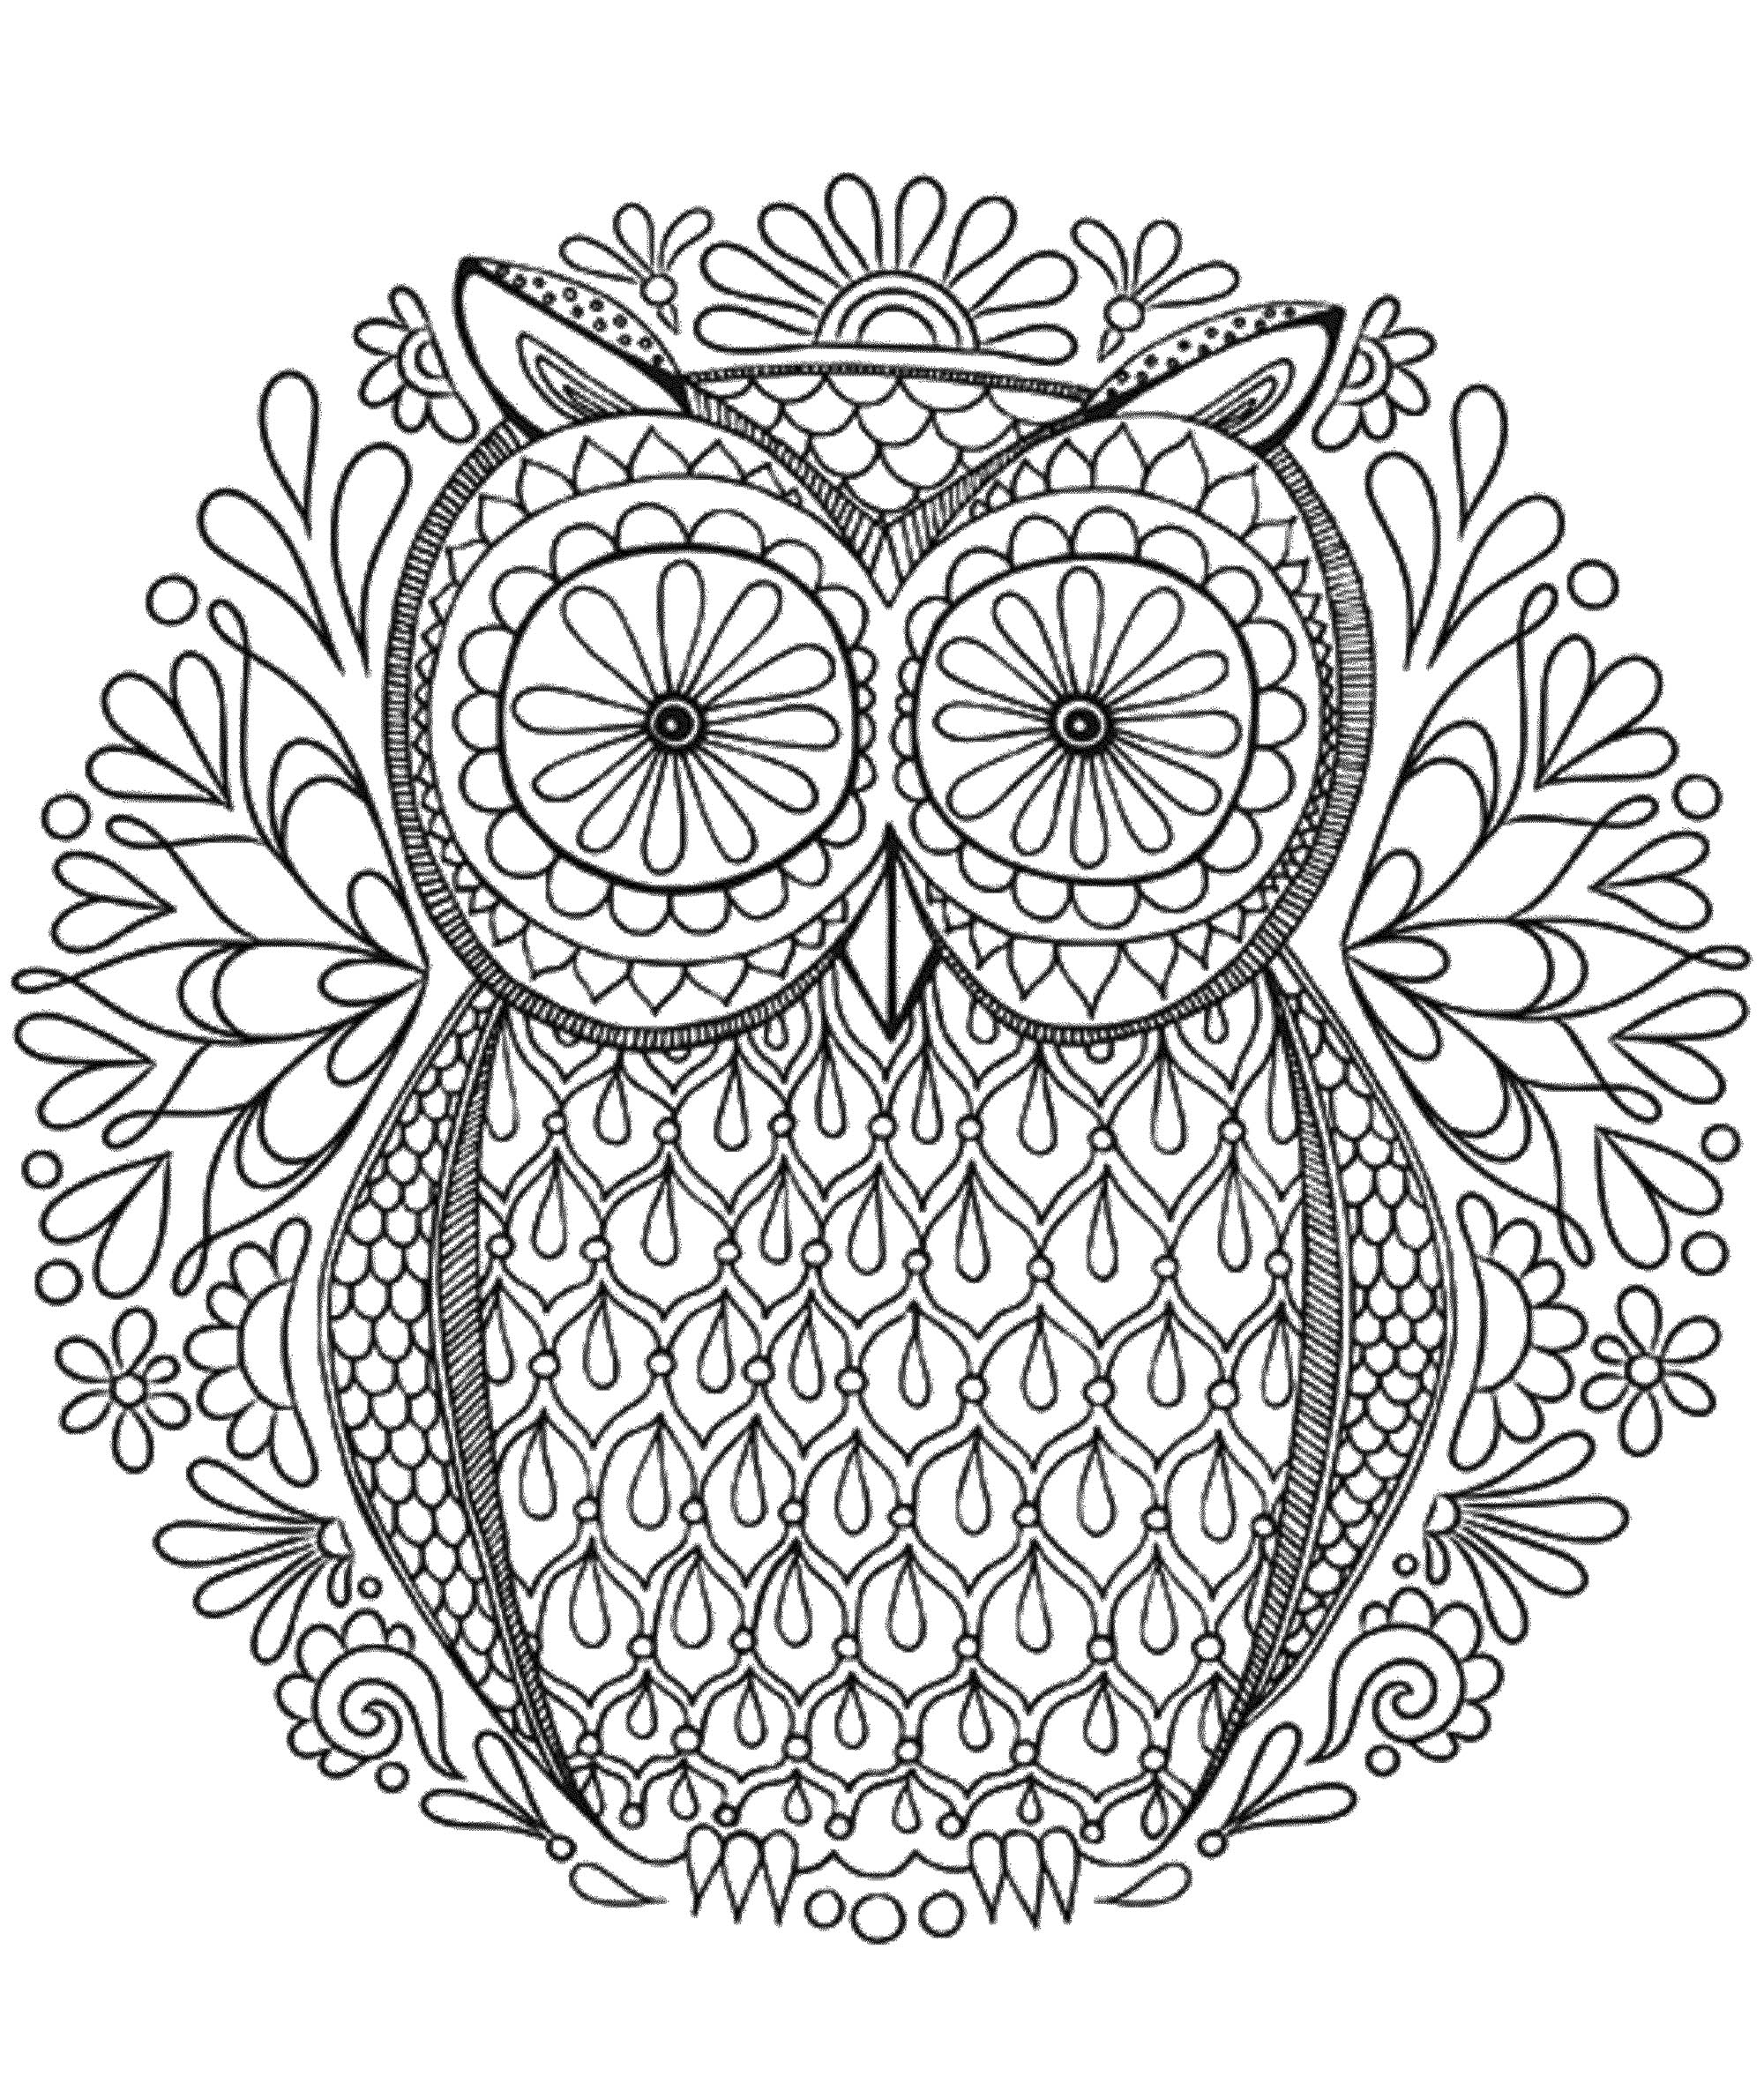 mandala-coloring-pages-pdf-at-getcolorings-free-printable-colorings-pages-to-print-and-color